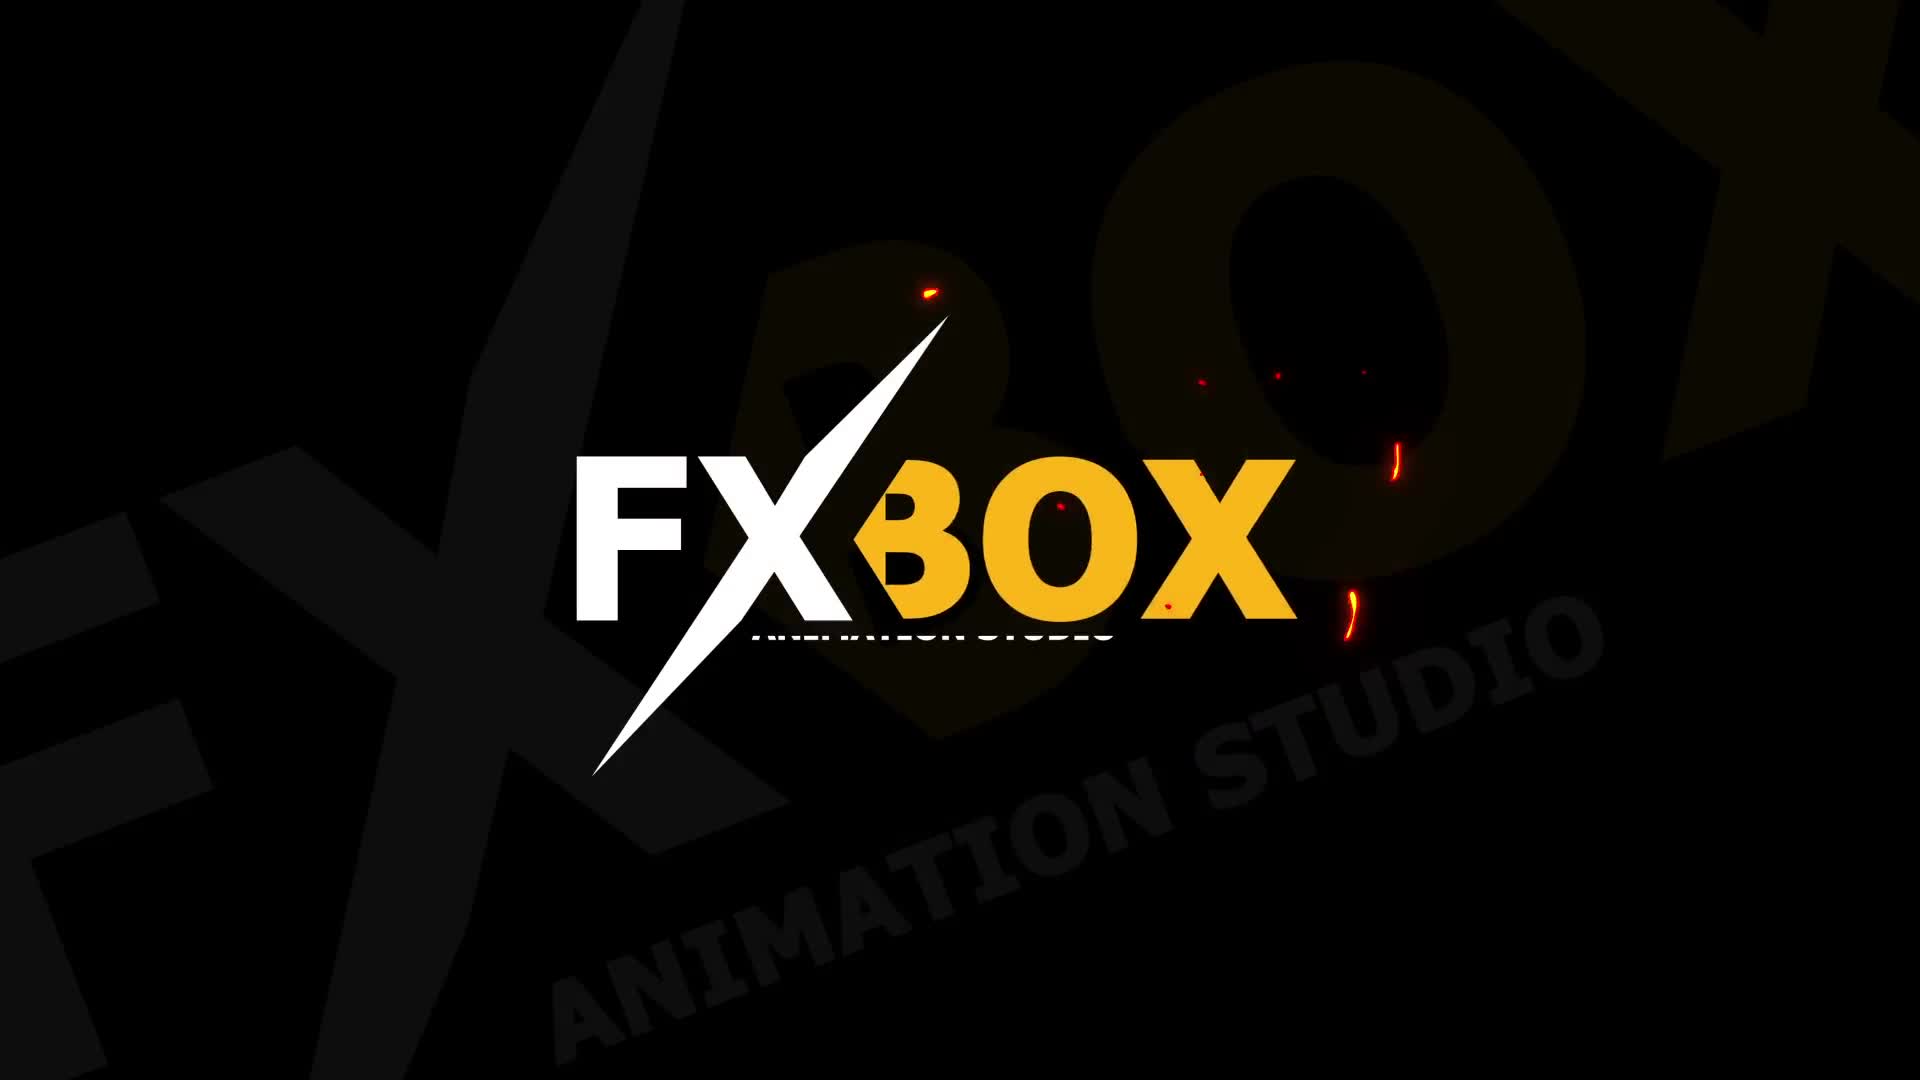 2D FX Fire Elements - Download Videohive 23313410